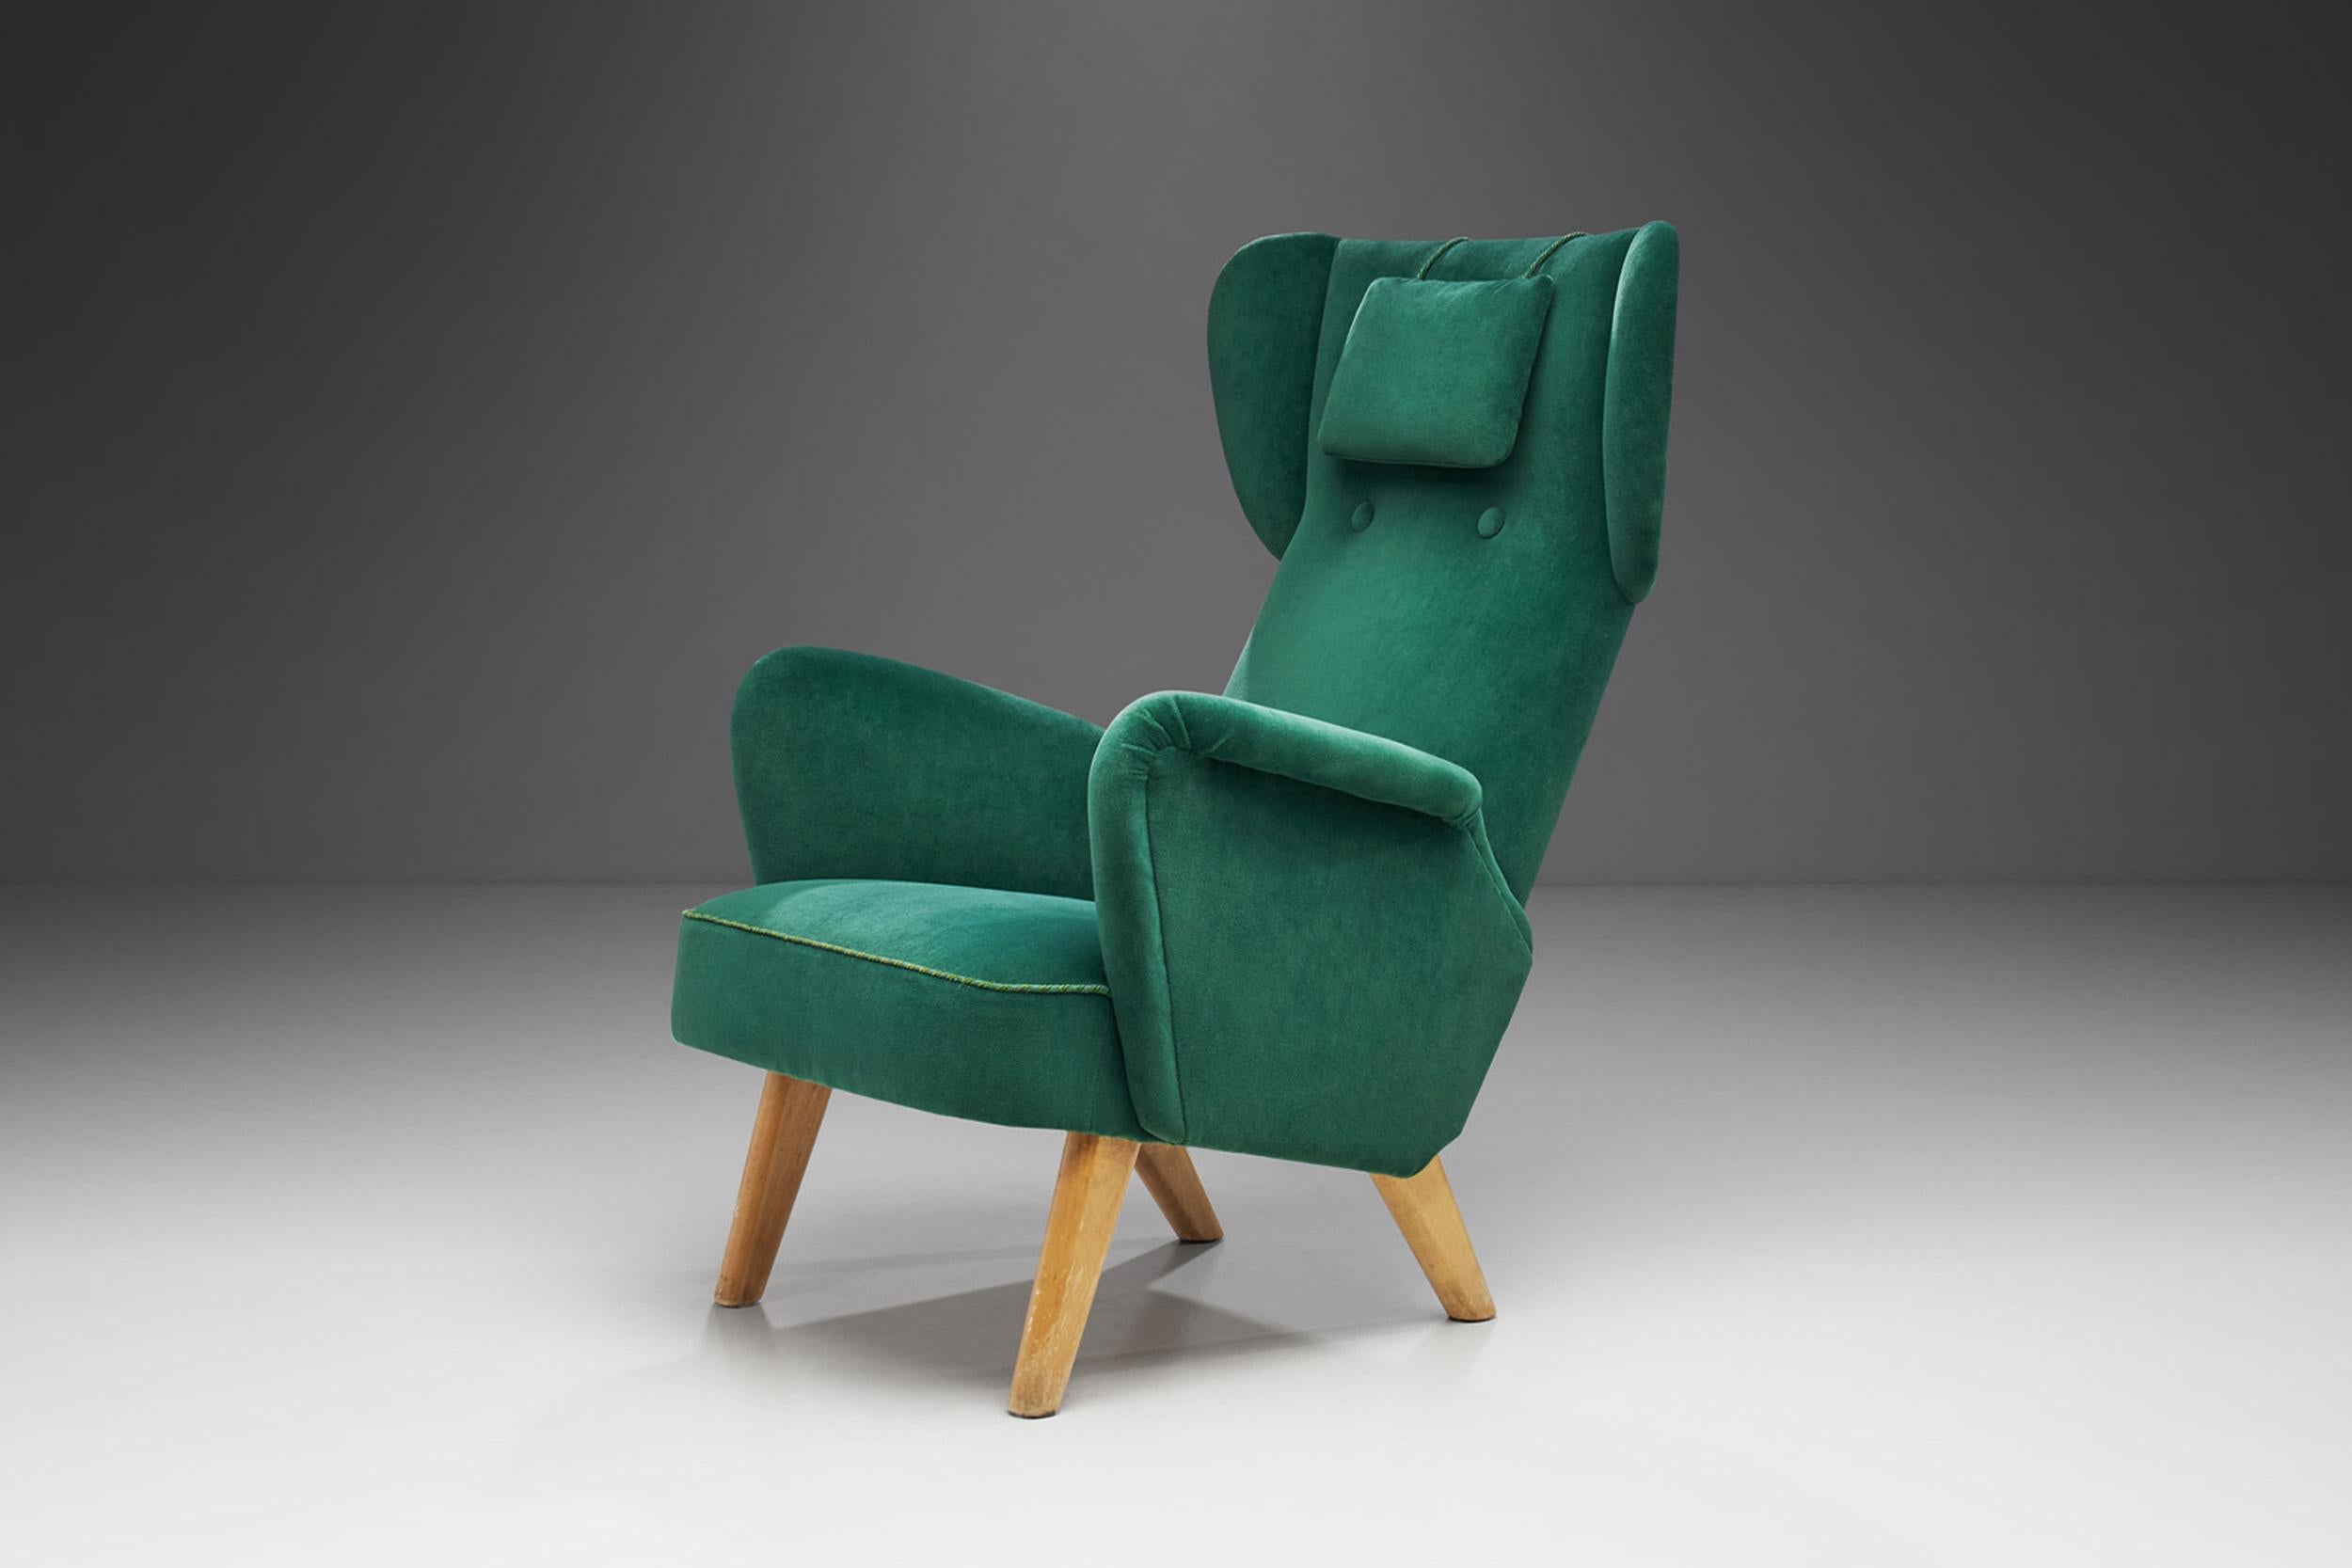 Scandinavian Modern Carl Gustaf Hiort Af Ornäs Armchair for Hiort Tuote Puunveisto, Finland Mid-1940 For Sale